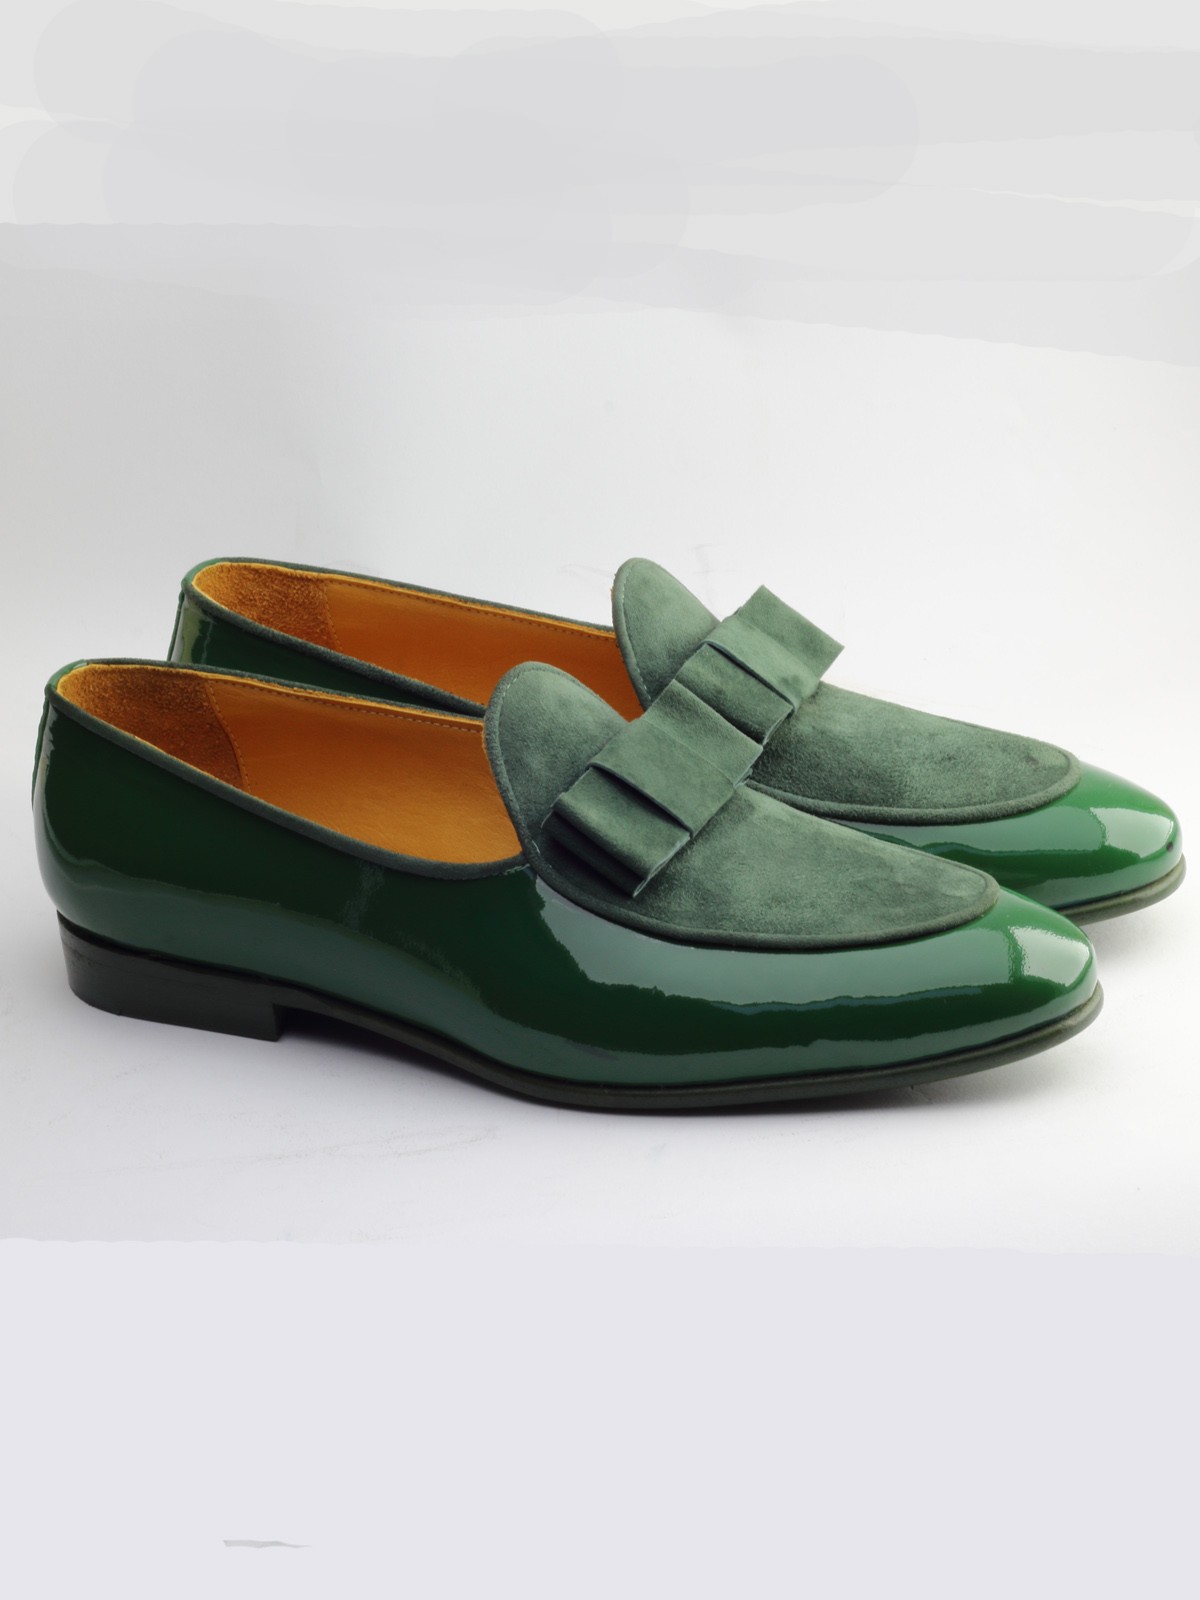 Buy Green Bespoke Shoes by Gentwith.com with Free Shipping